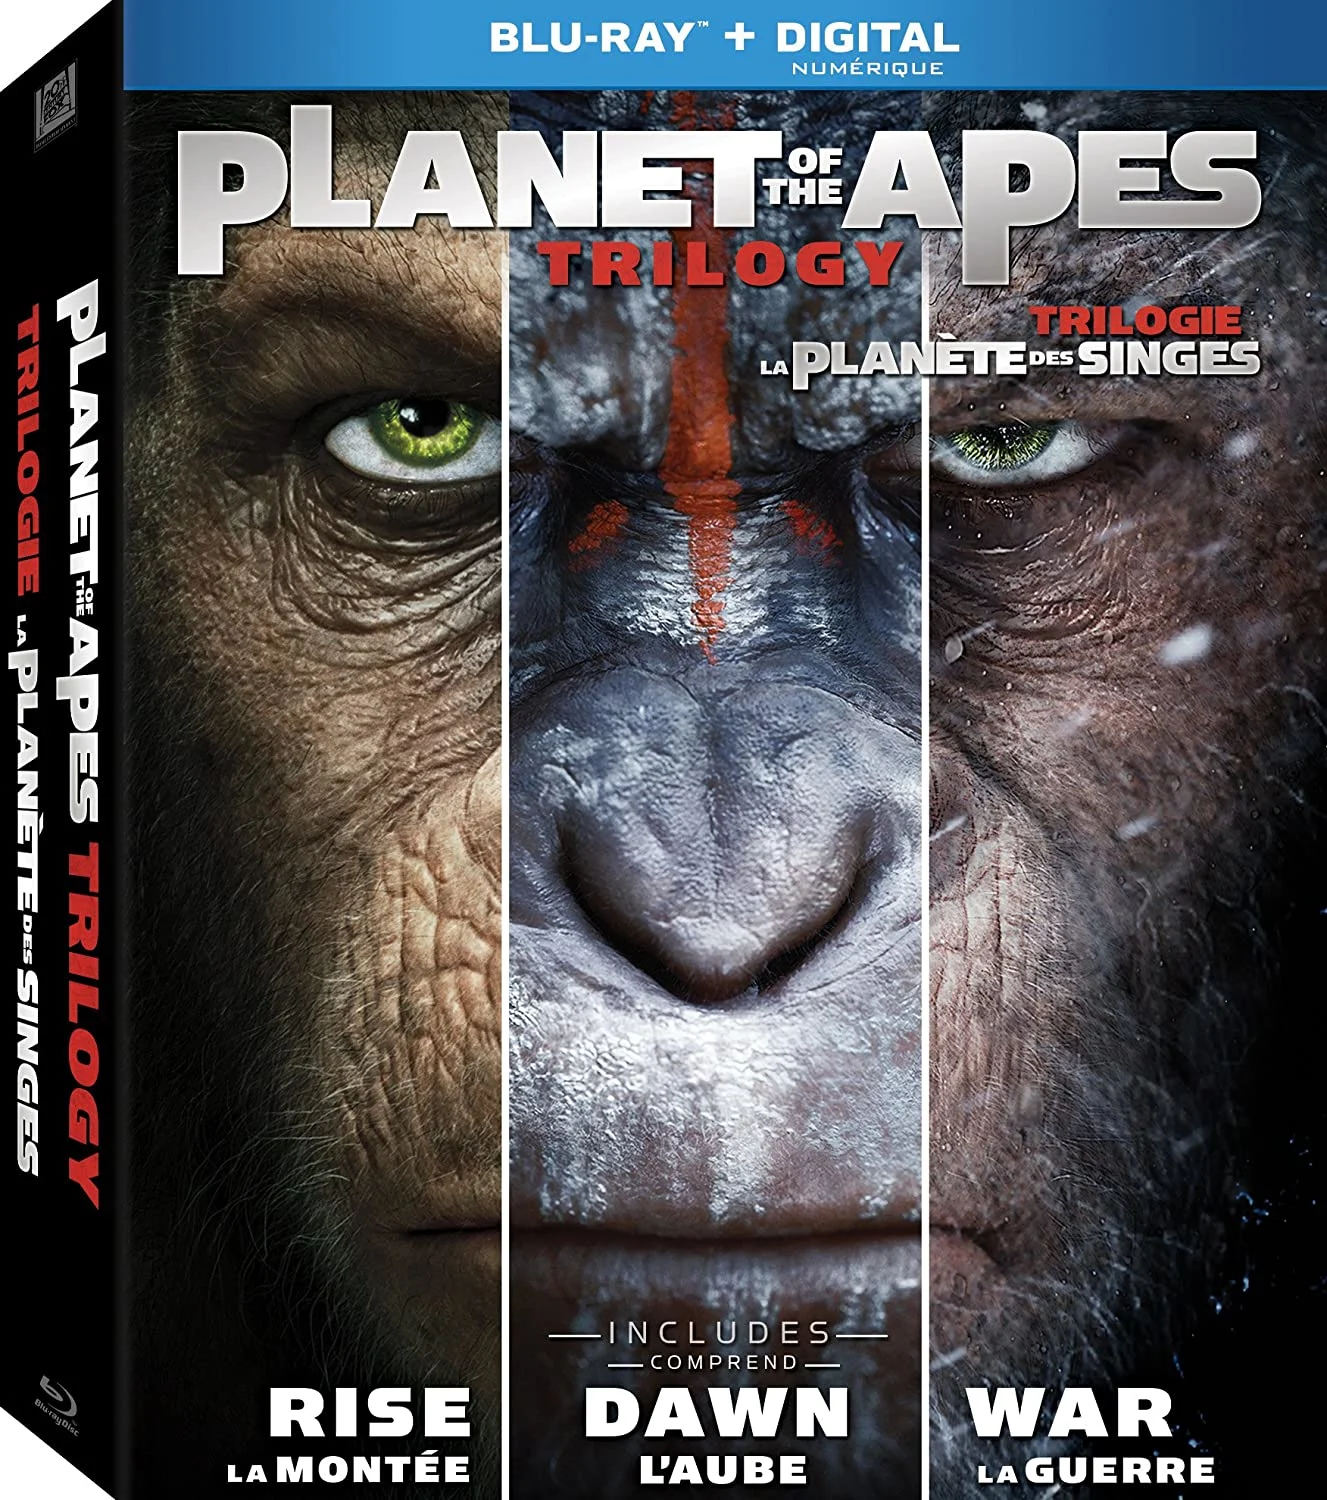 Planet of the Apes: Trilogy Box Set (Blu-ray) on MovieShack